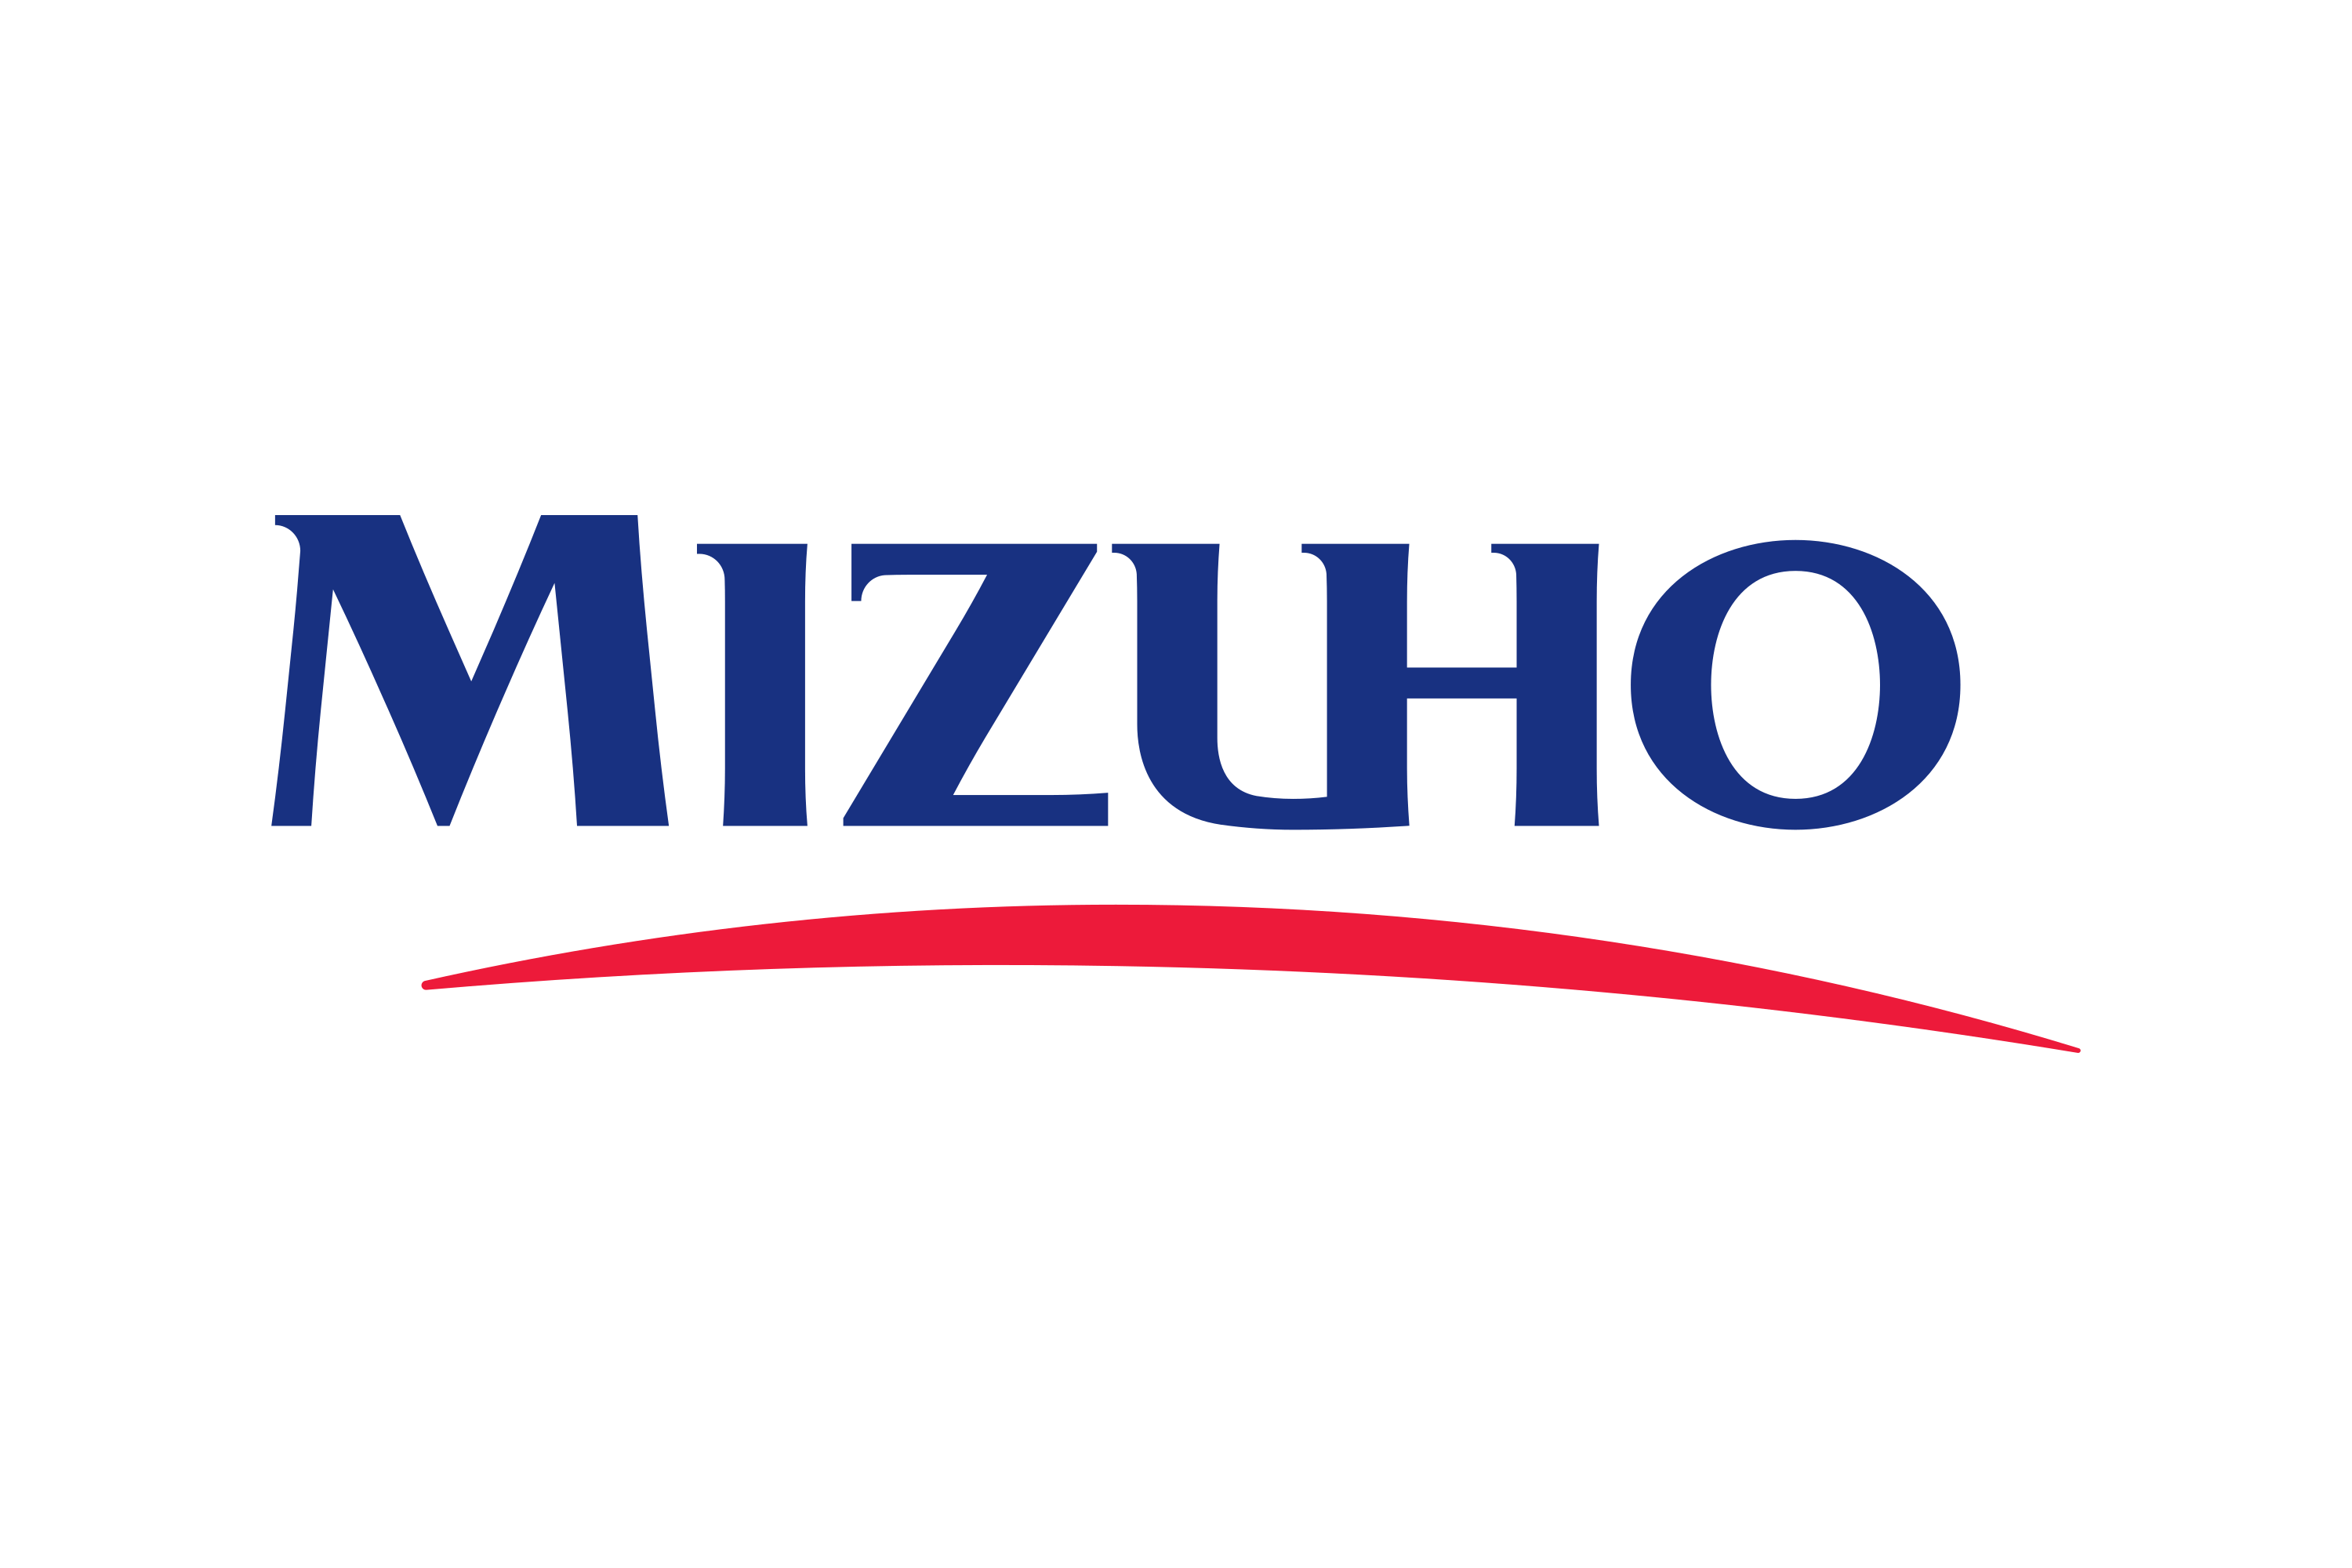 Download Mizuho Financial Group Logo in SVG Vector or PNG File Format